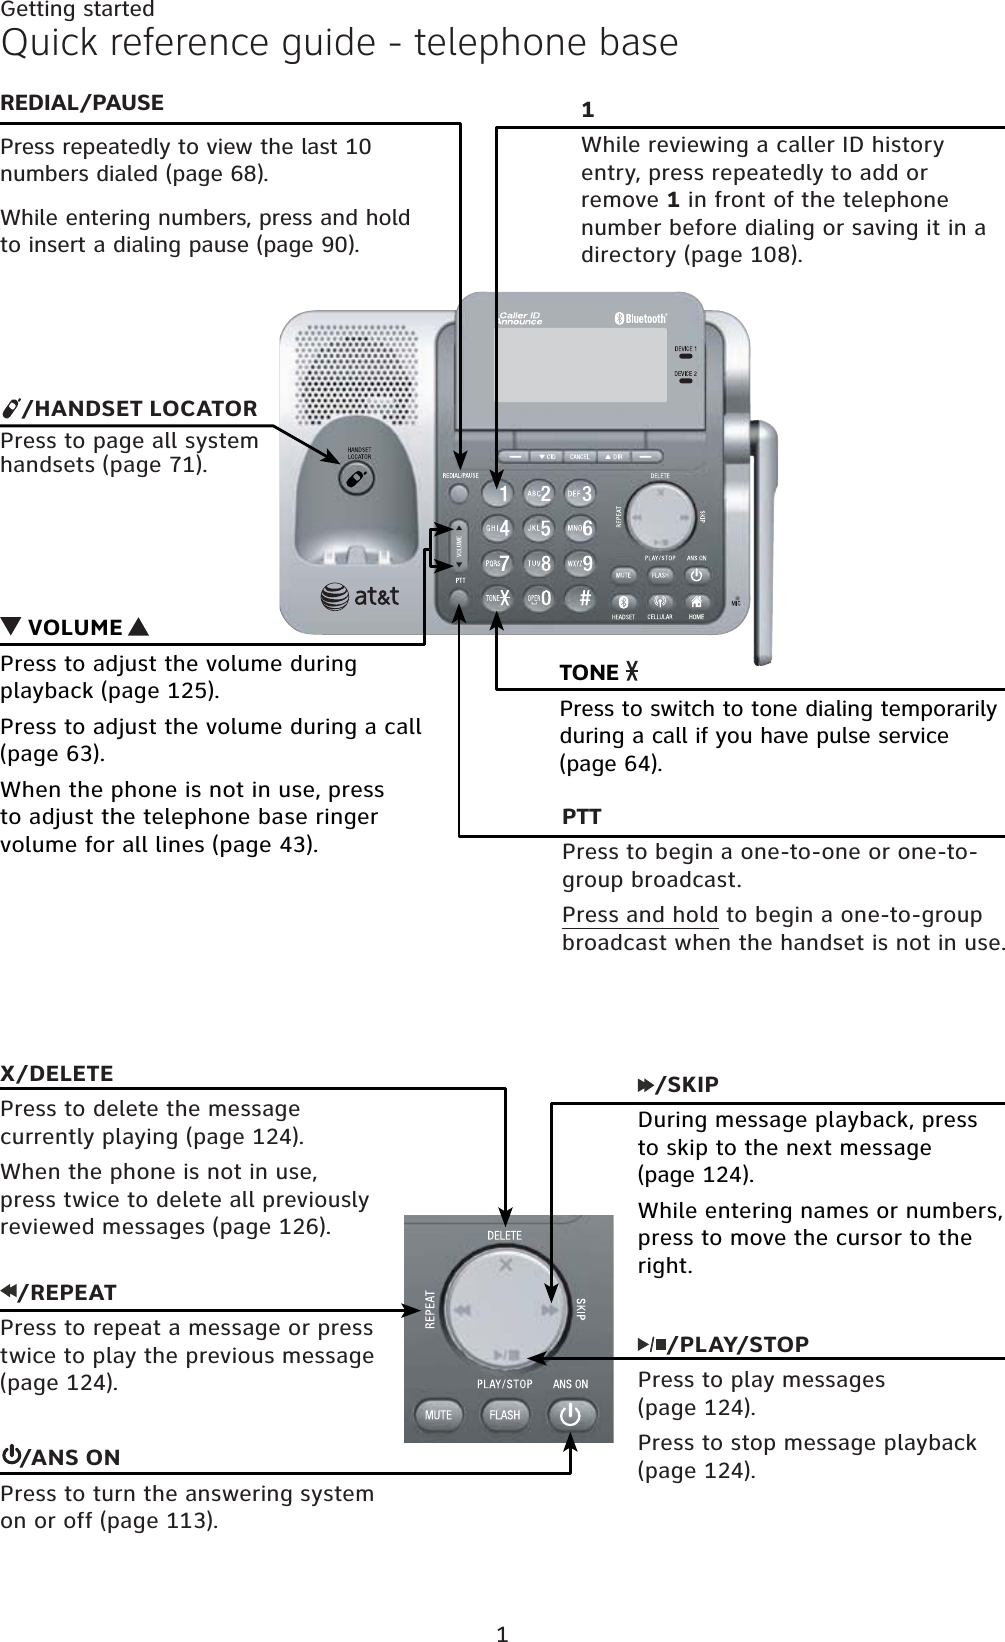 1Quick reference guide - telephone base VOLUME Press to adjust the volume during playback (page 125).Press to adjust the volume during a call (page 63).When the phone is not in use, press to adjust the telephone base ringer volume for all lines (page 43)./SKIPDuring message playback, press to skip to the next message (page 124).While entering names or numbers, press to move the cursor to the right.TONE Press to switch to tone dialing temporarily during a call if you have pulse service (page 64)./REPEATPress to repeat a message or press twice to play the previous message (page 124)./ANS ONPress to turn the answering system on or off (page 113)./PLAY/STOPPress to play messages (page 124).Press to stop message playback (page 124).REDIAL/PAUSEPress repeatedly to view the last 10 numbers dialed (page 68).While entering numbers, press and hold to insert a dialing pause (page 90)./HANDSET LOCATORPress to page all system handsets (page 71).PTTPress to begin a one-to-one or one-to-group broadcast.Press and hold to begin a one-to-group broadcast when the handset is not in use.1While reviewing a caller ID history entry, press repeatedly to add or remove 1 in front of the telephone number before dialing or saving it in a directory (page 108).X/DELETEPress to delete the message currently playing (page 124).When the phone is not in use, press twice to delete all previously reviewed messages (page 126).Getting started